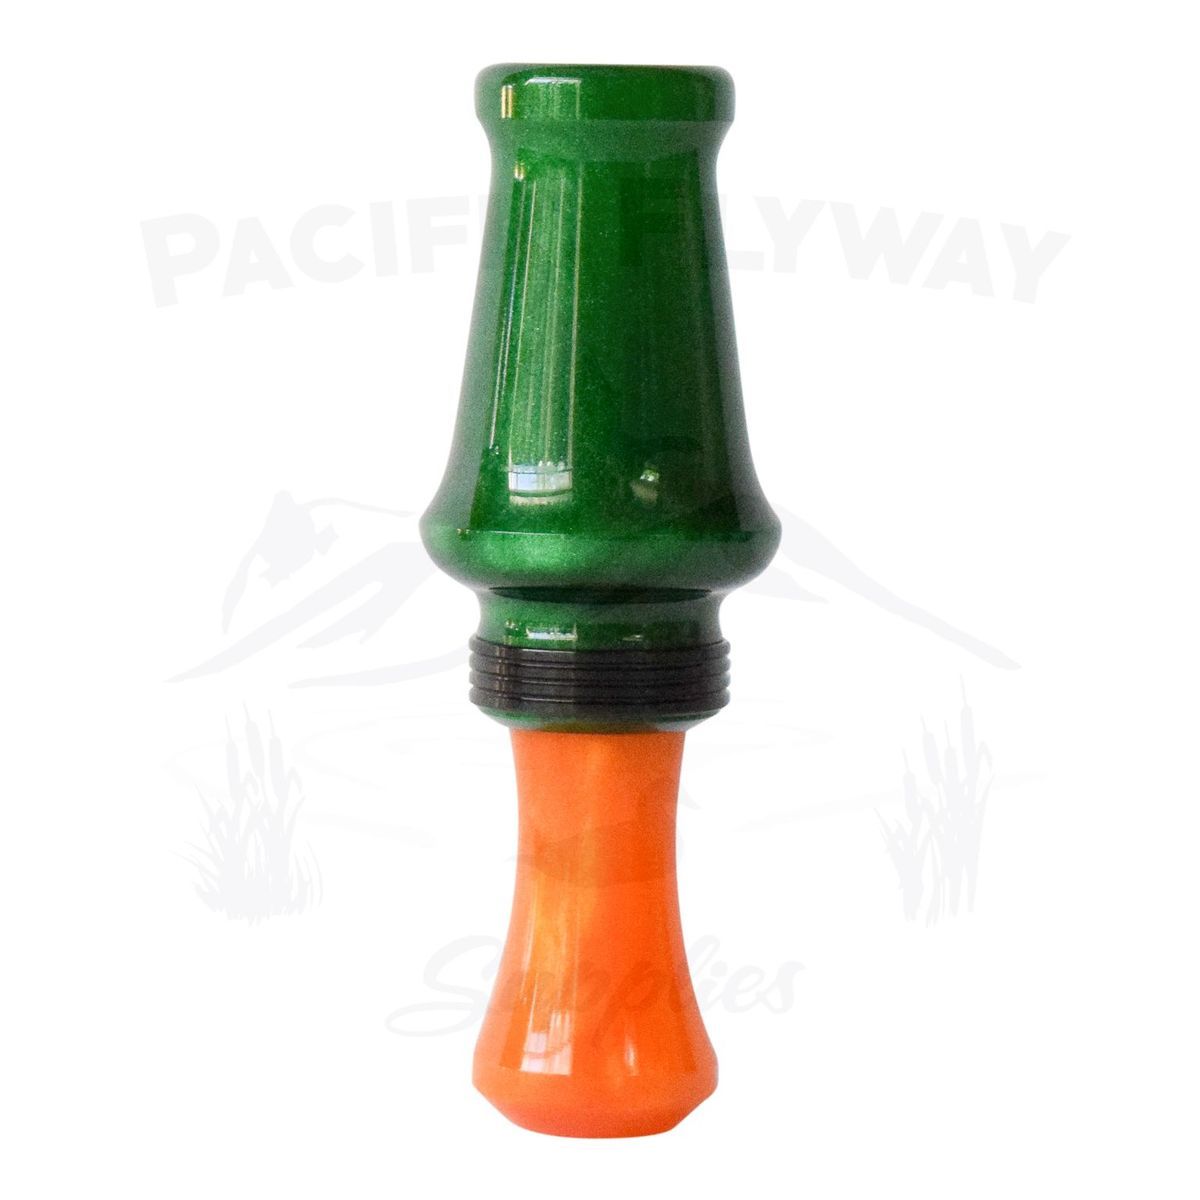 J. J. Lares Hybrid Duck Call - Polished Boots On - Pacific Flyway Supplies